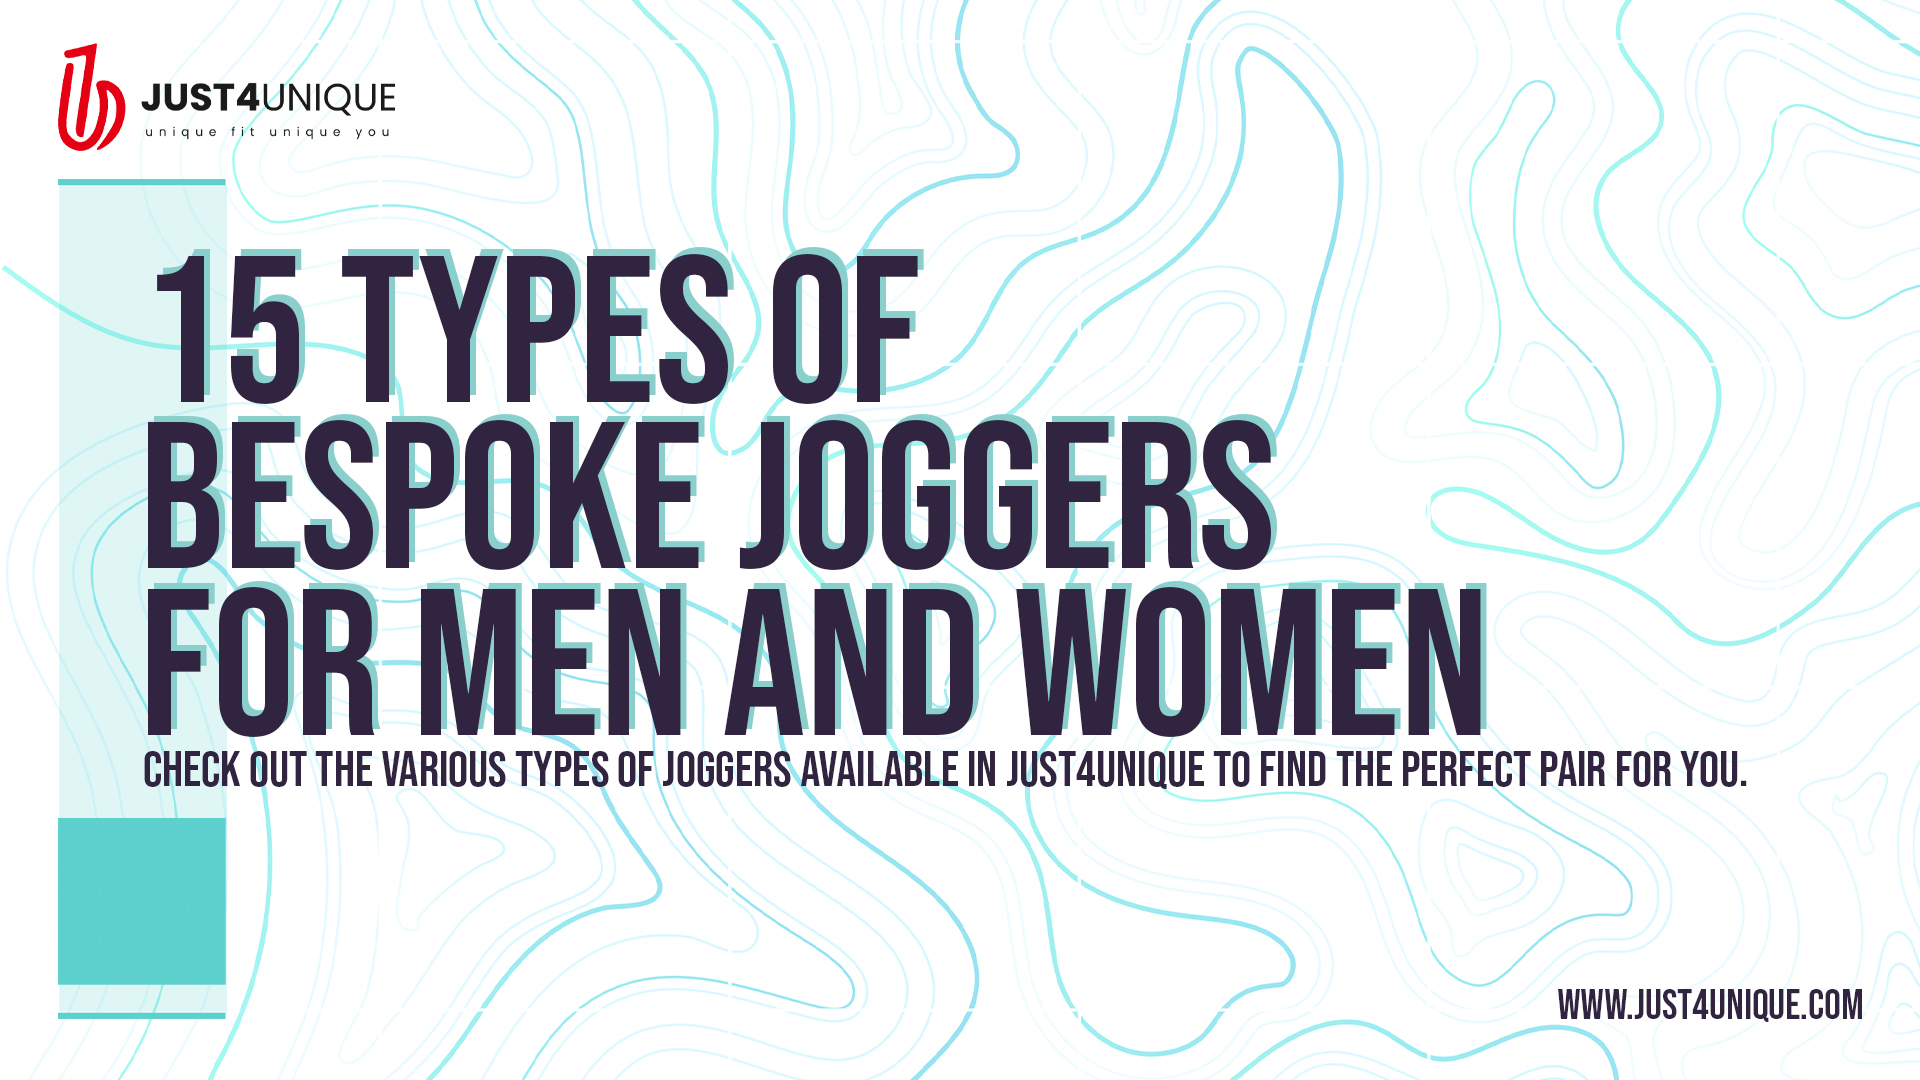 15 Types of Joggers For Men and Women